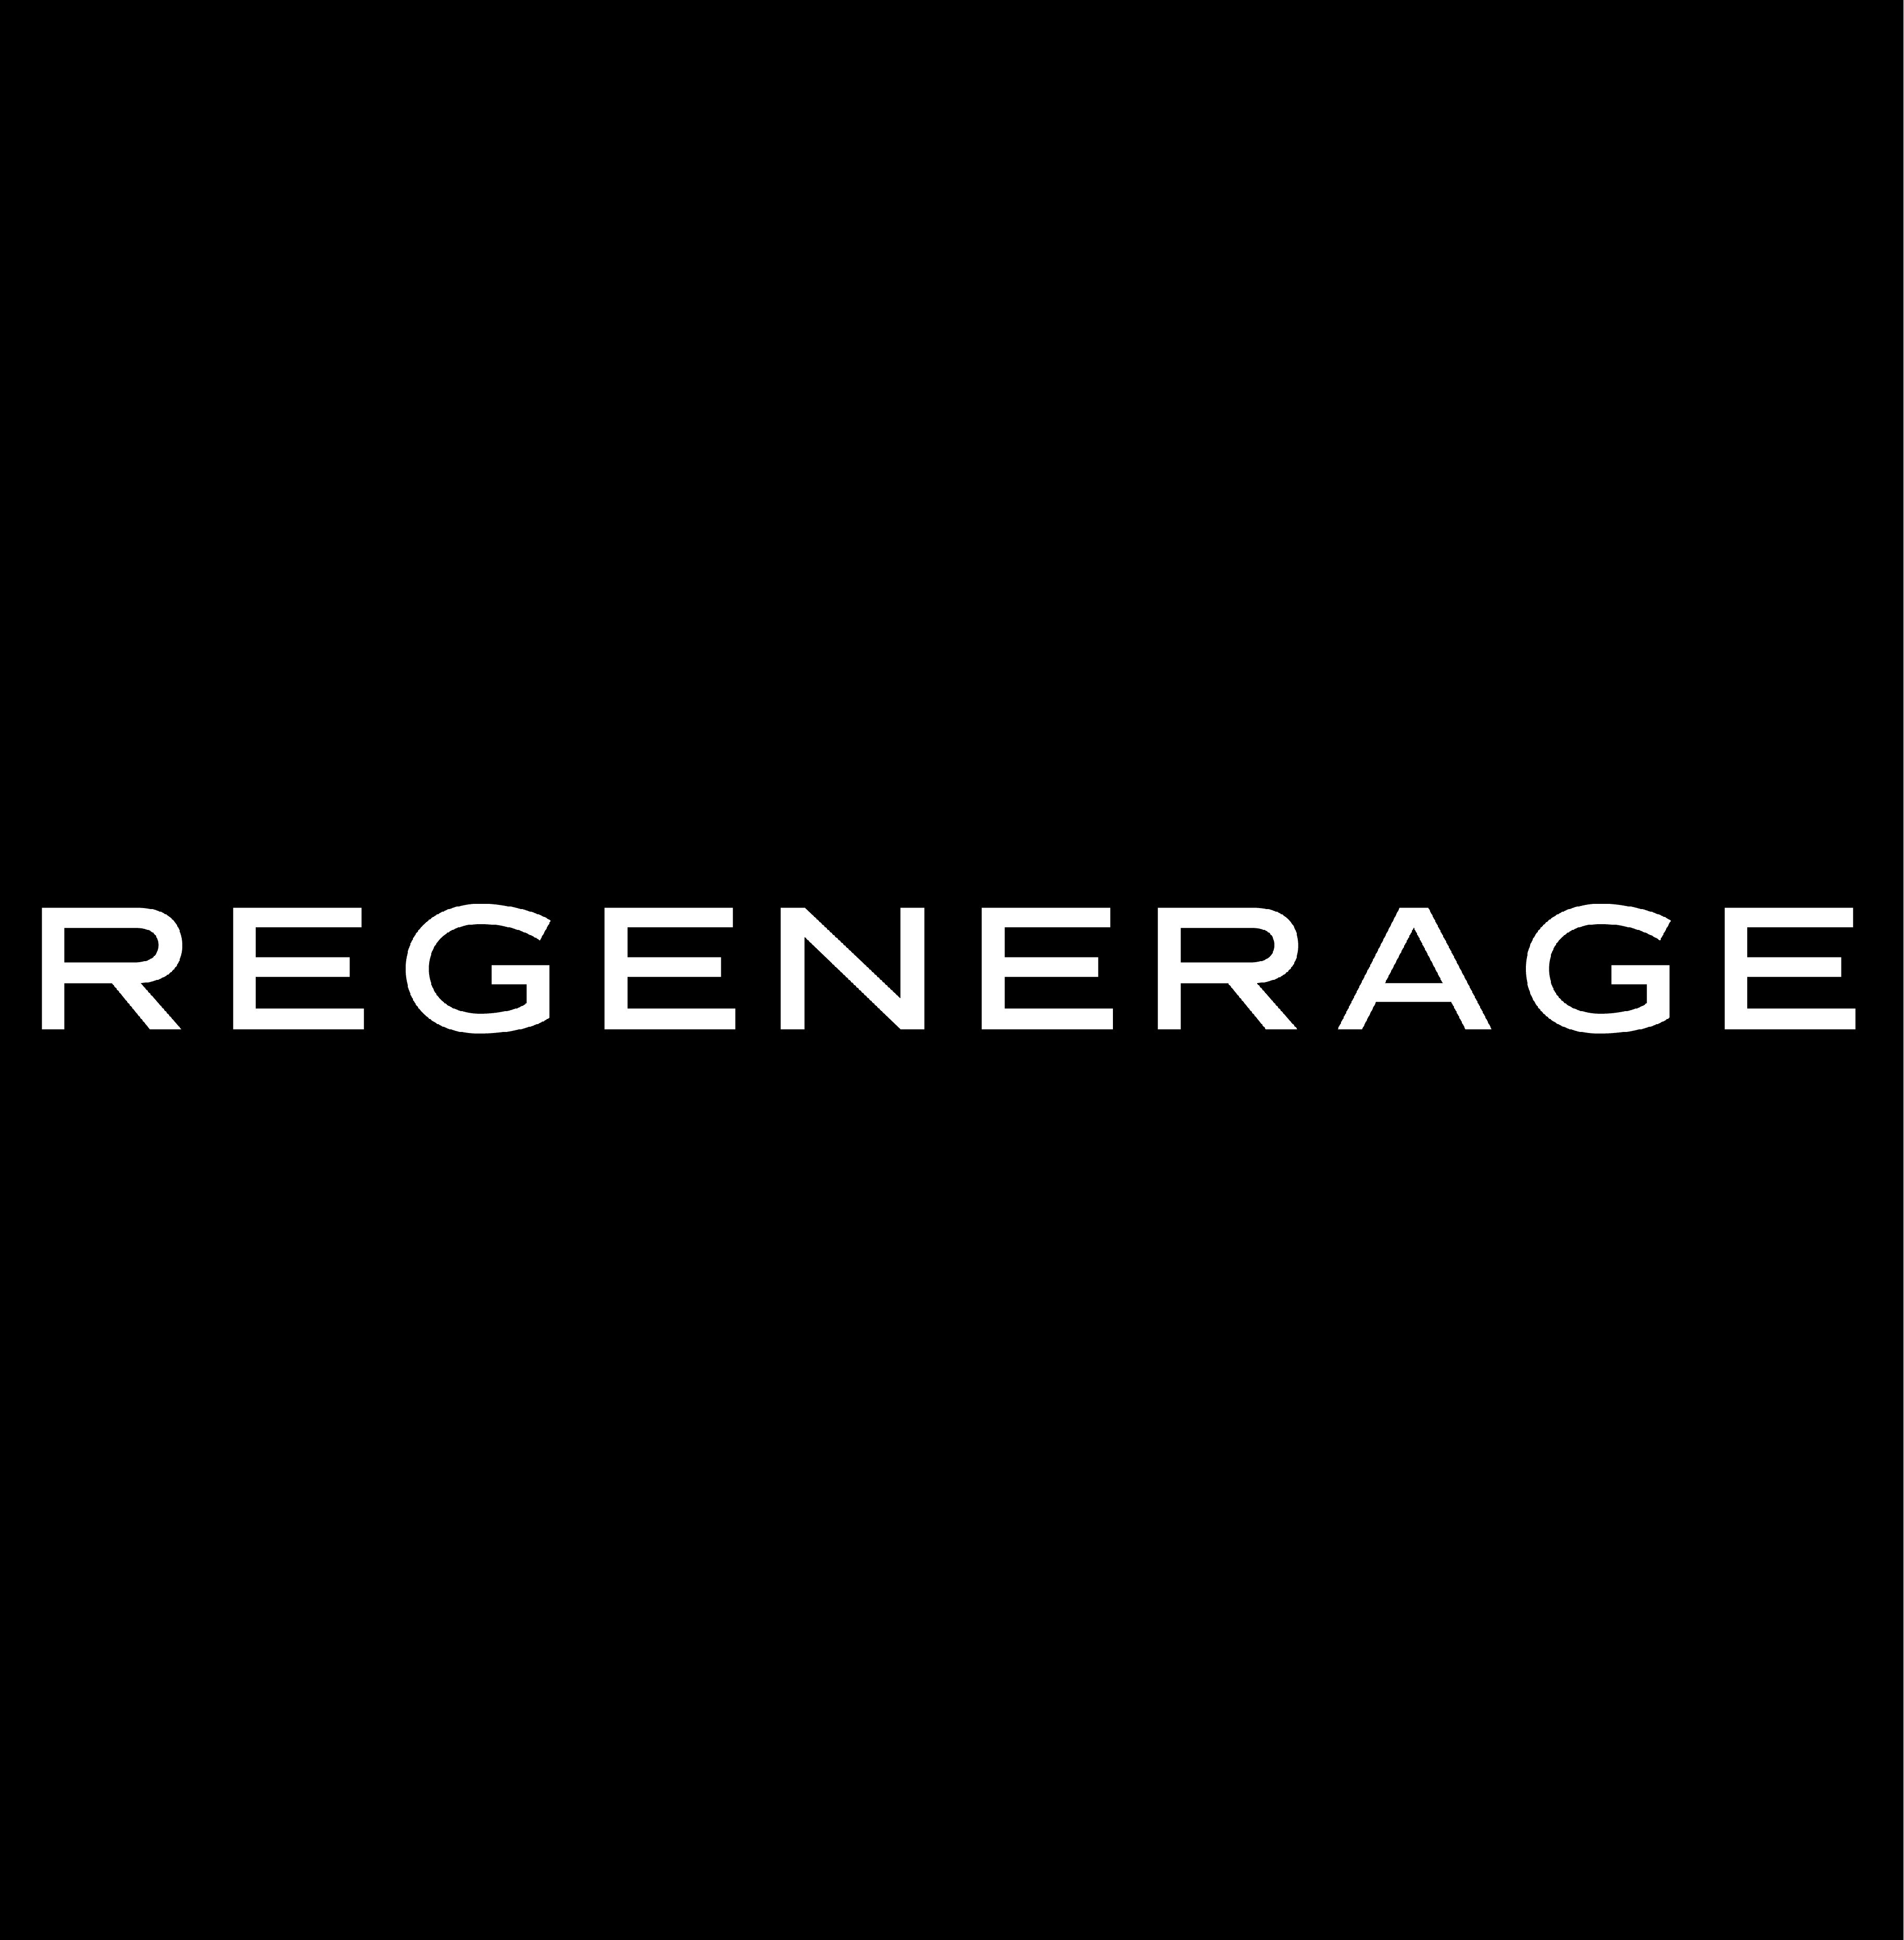 Why Regenerage? Because We Know That Science Can Do More For Your Health And Beauty.